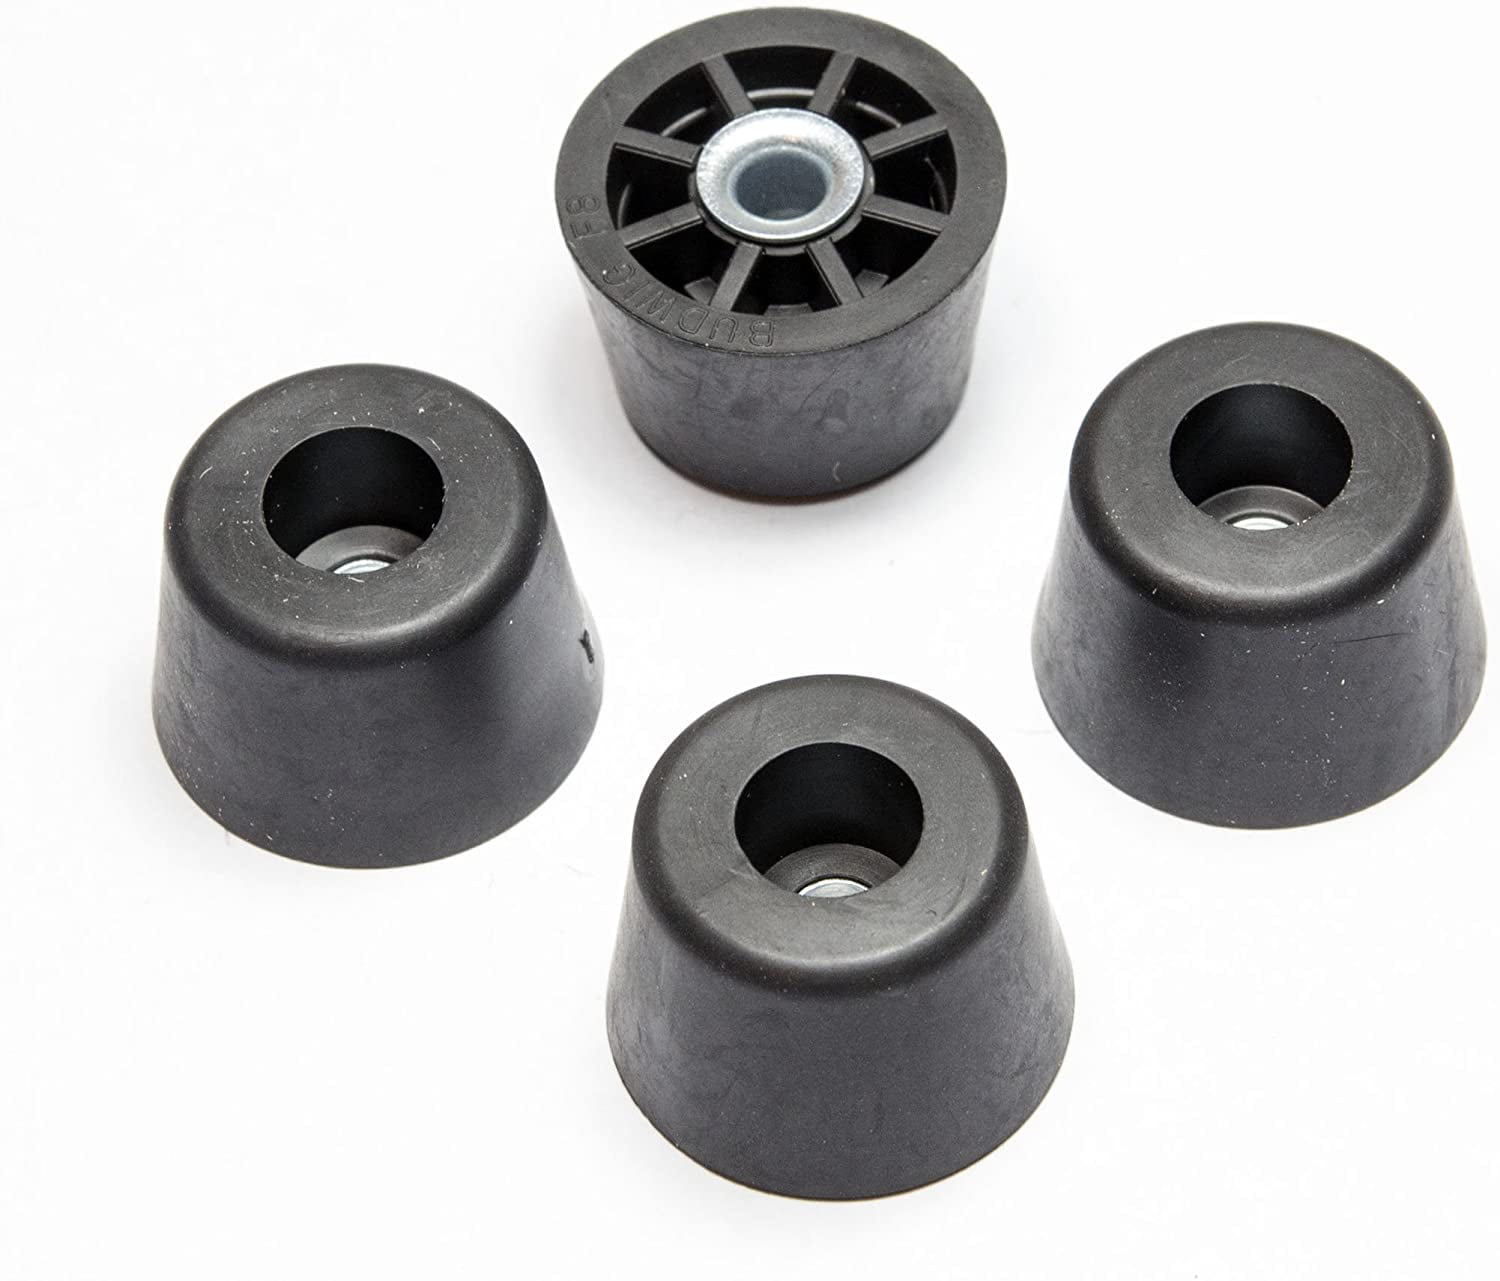 4 LARGE EXTRA TALL  1" H X 1" W ROUND RUBBER FEET BUMPERS 